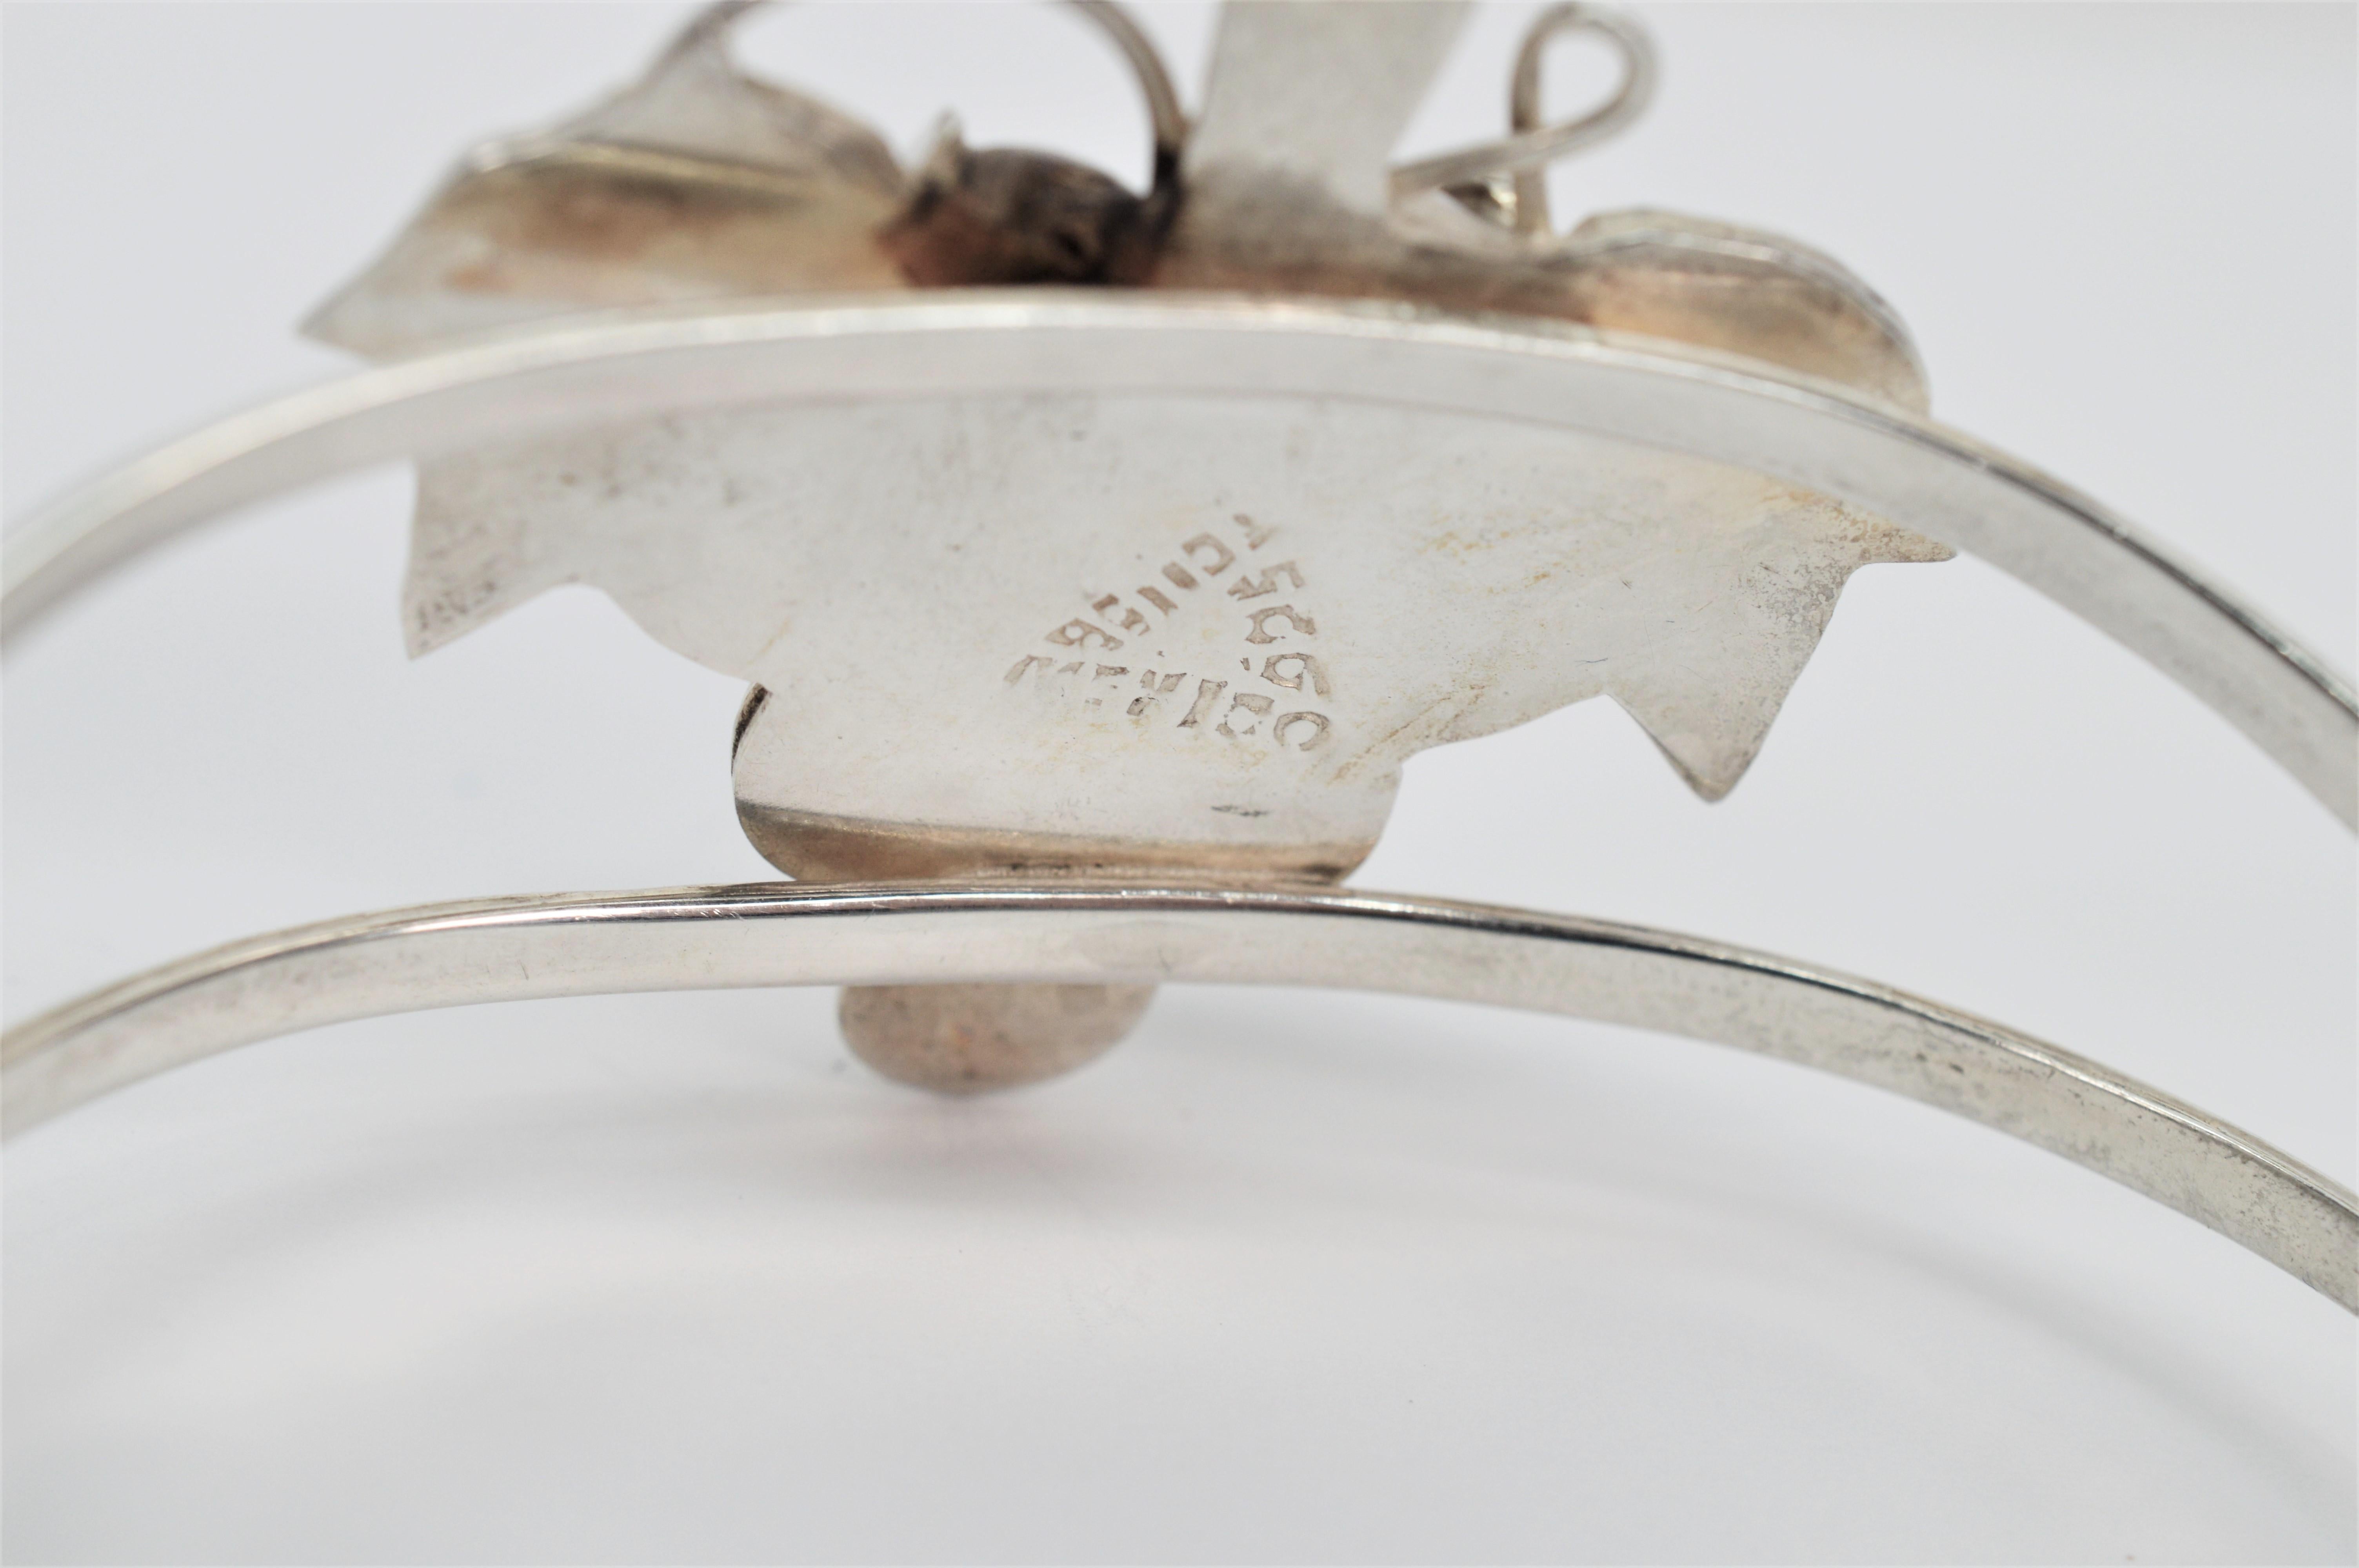 Artisan Sculptured Sterling Silver Grapevine Cuff Bracelet  In Good Condition For Sale In Mount Kisco, NY